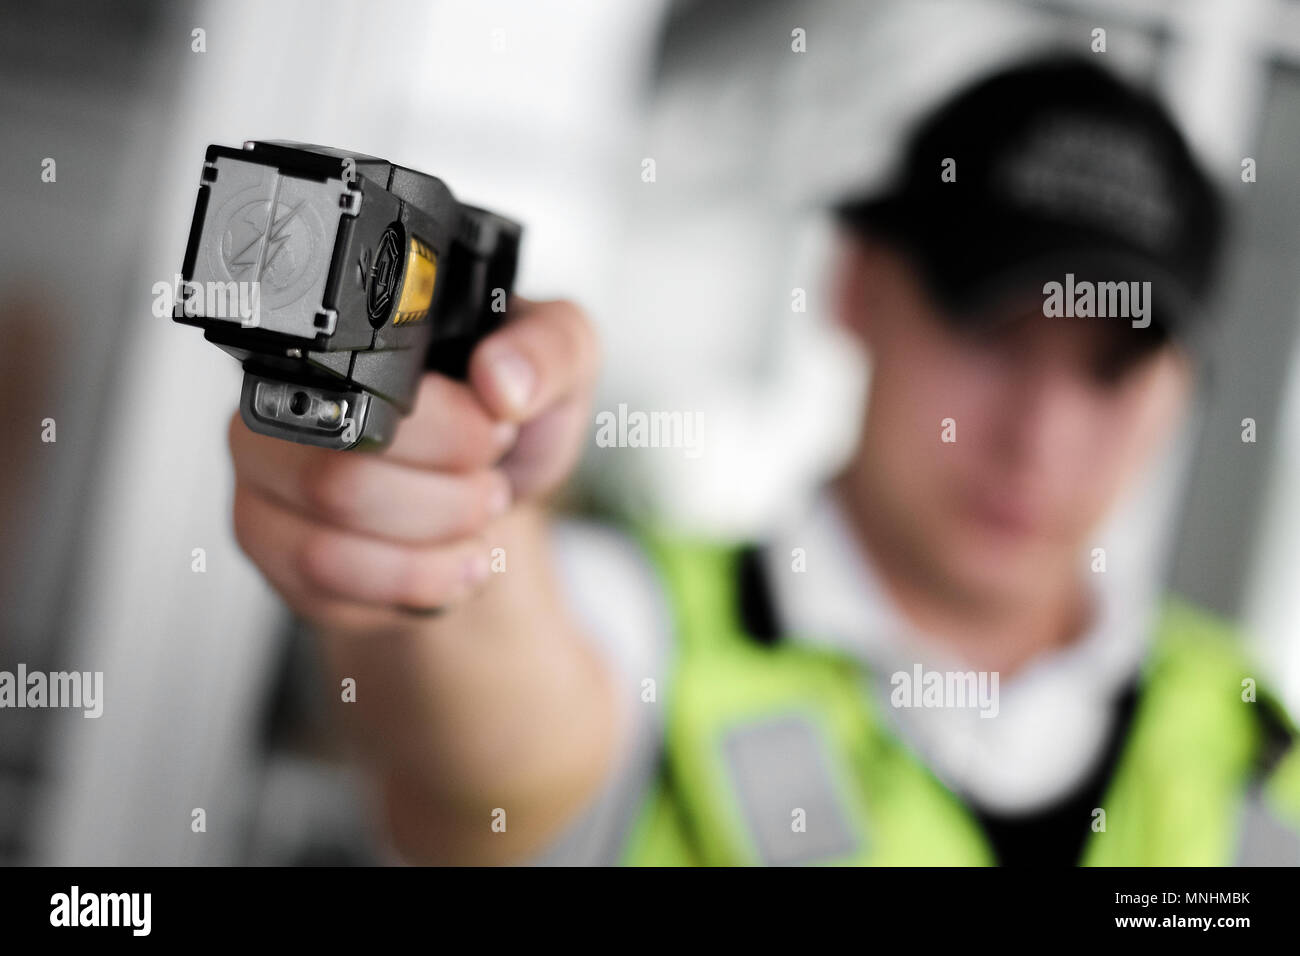 Closeup view of a loaded stun gun in a hand of a young man wearing high visibility vest Stock Photo